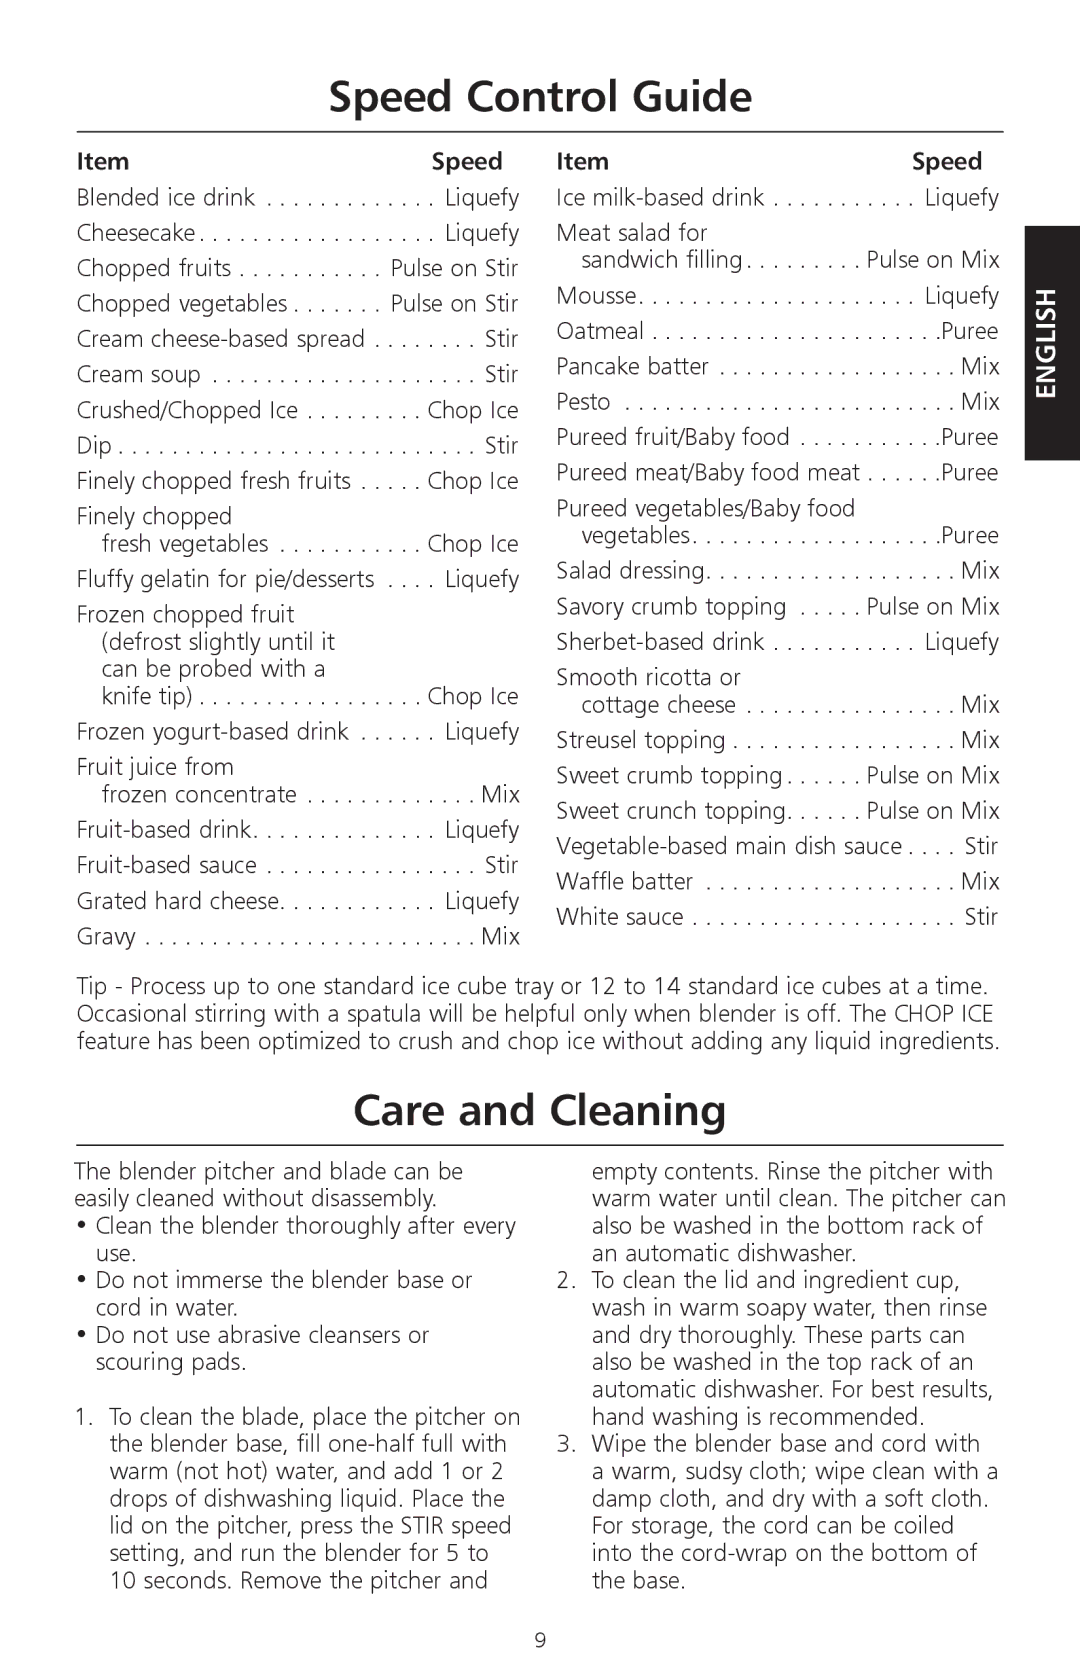 KitchenAid KSB465 manual Speed Control Guide, Care and Cleaning, ItemSpeed 